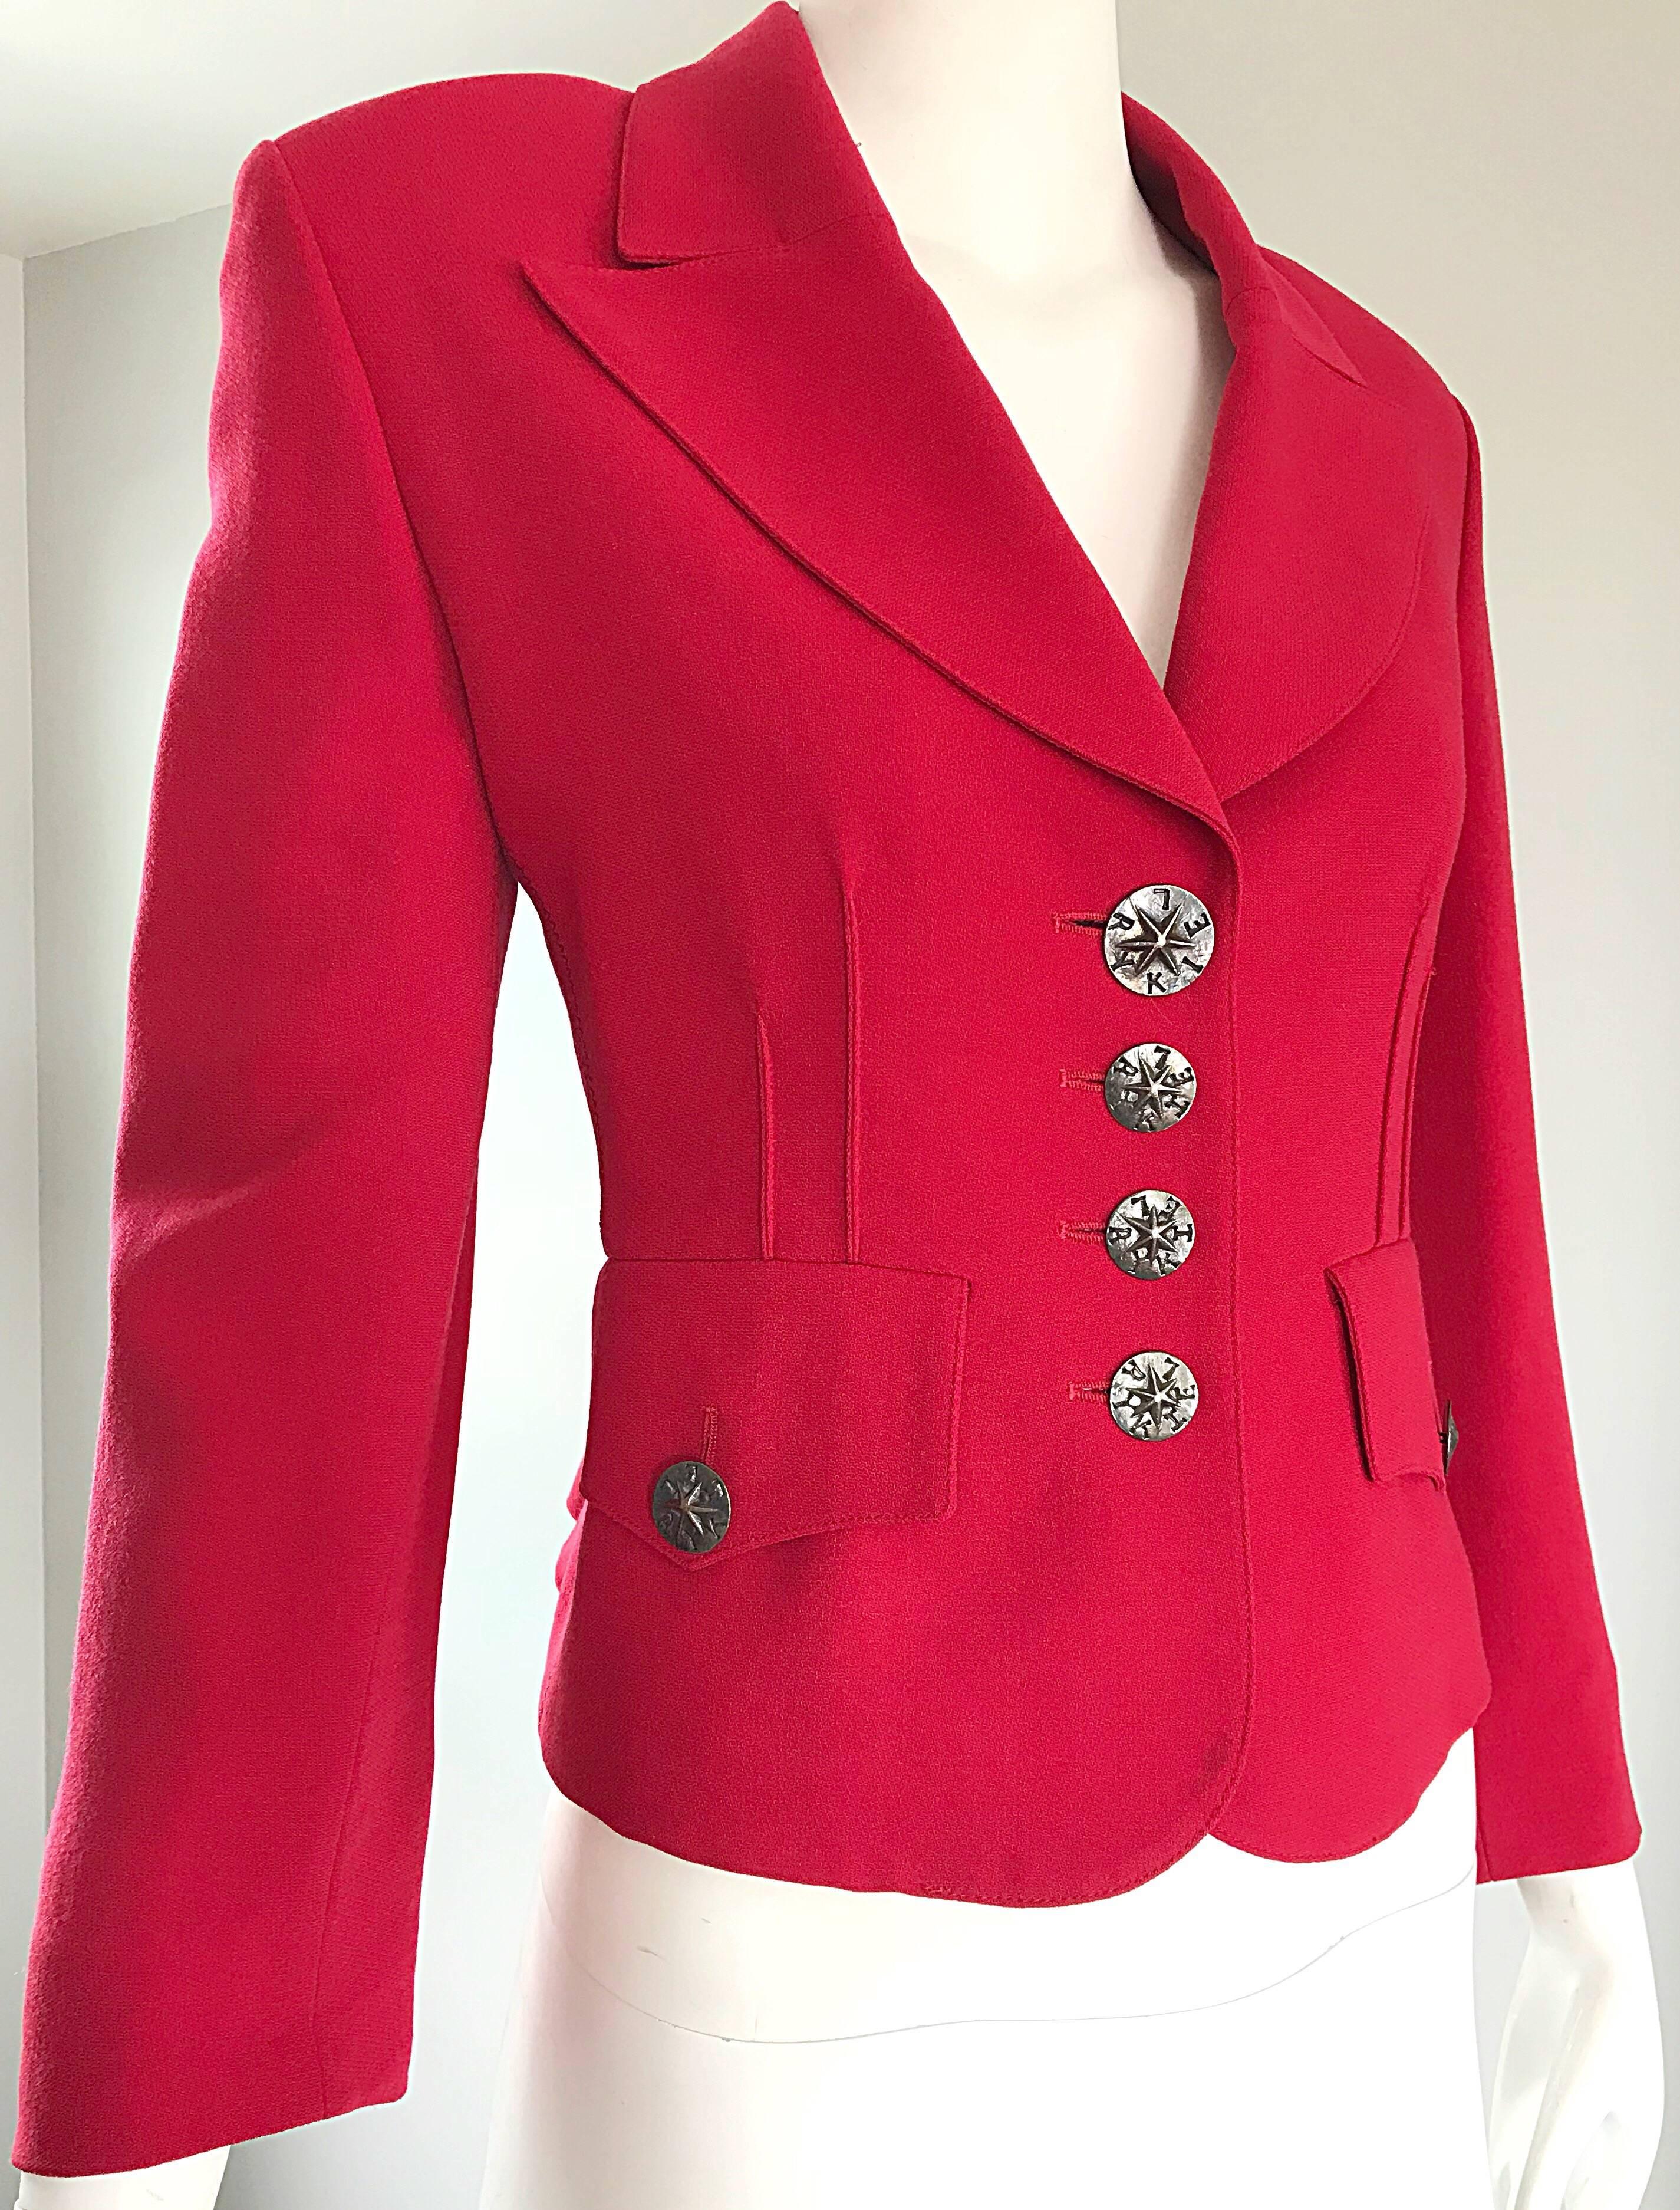 Vintage Sonia Rykiel 1990s Does 40s Sz 40 Lipstick Red Cropped 90s Blazer Jacket In Excellent Condition For Sale In San Diego, CA